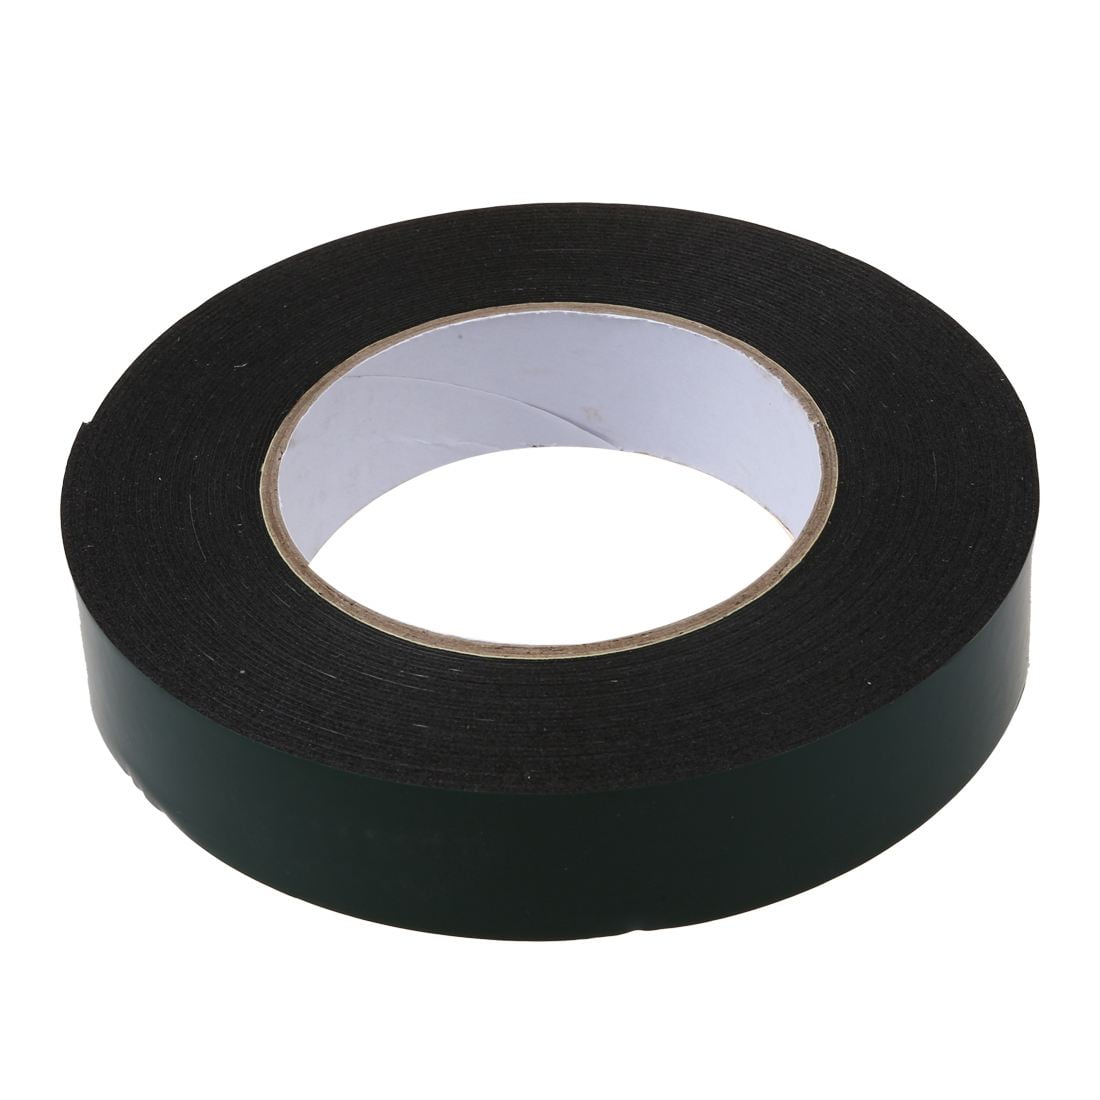 10M Black Super Strong Double Sided Foam Tape Permanent Self Adhesive Trim Body 